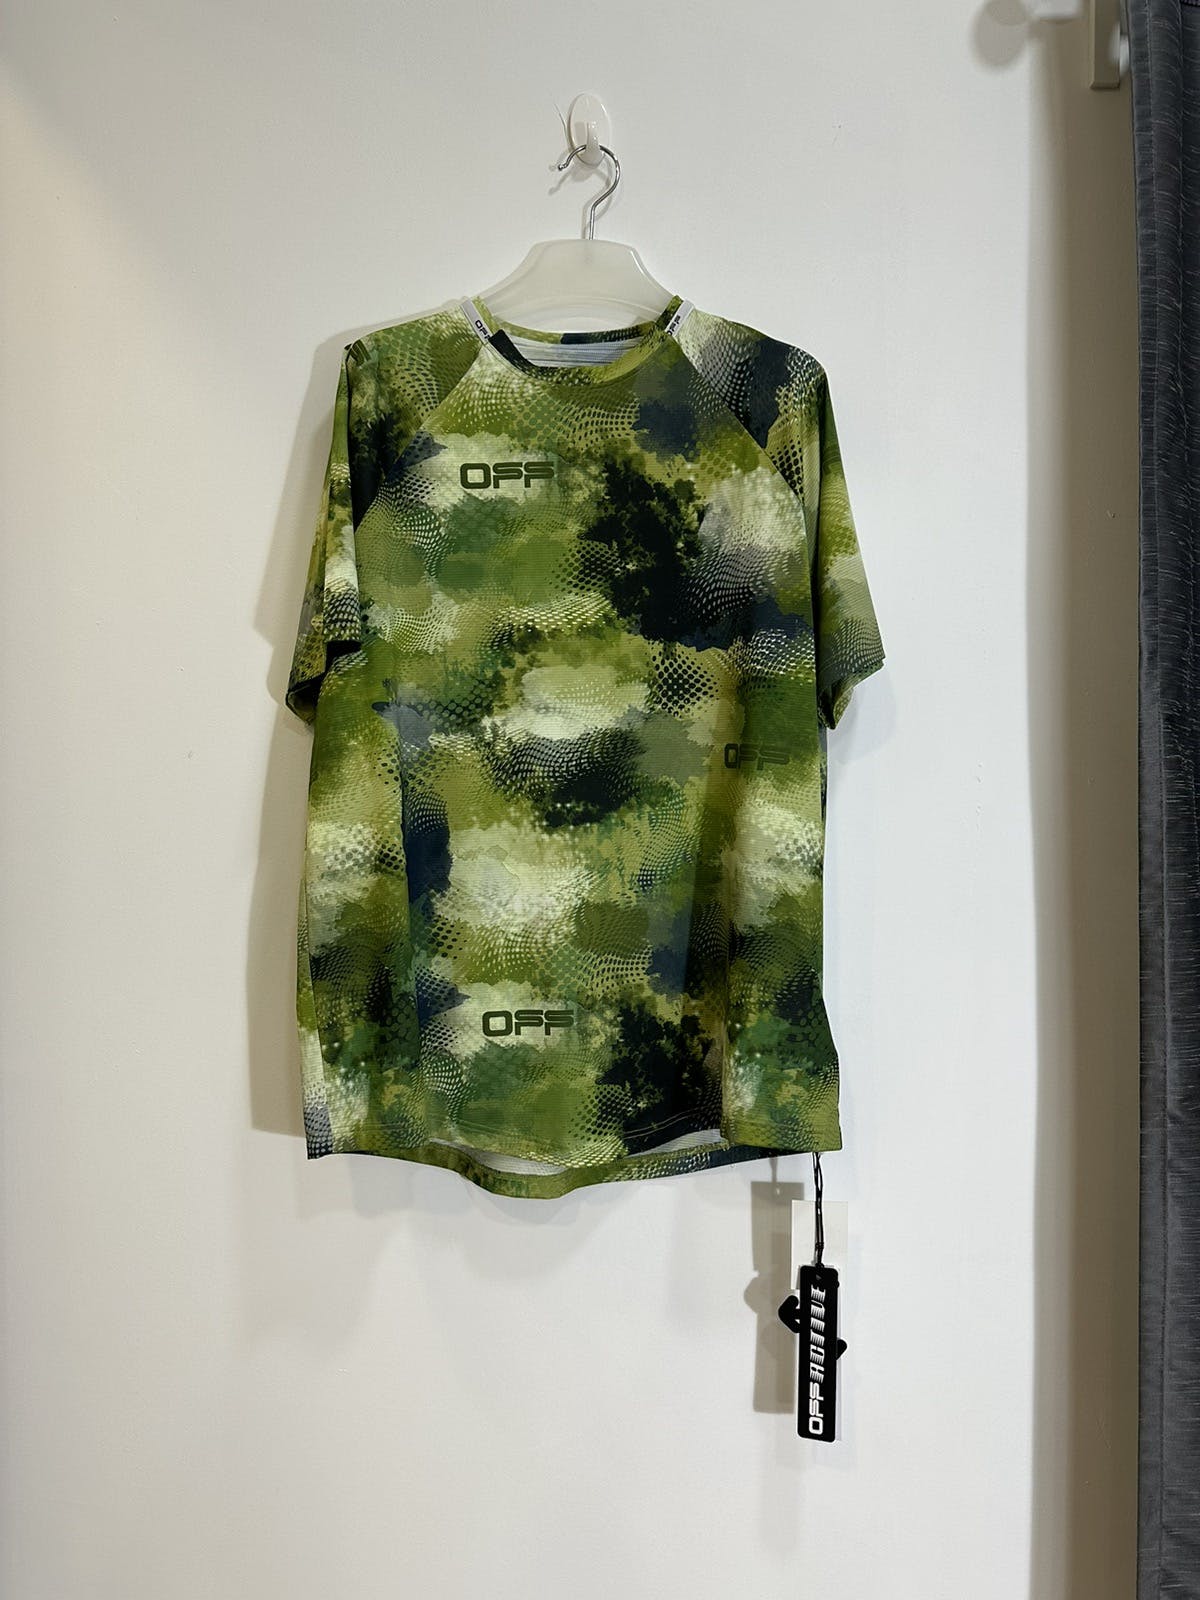 Off White Active Camo Print Jersey - 4